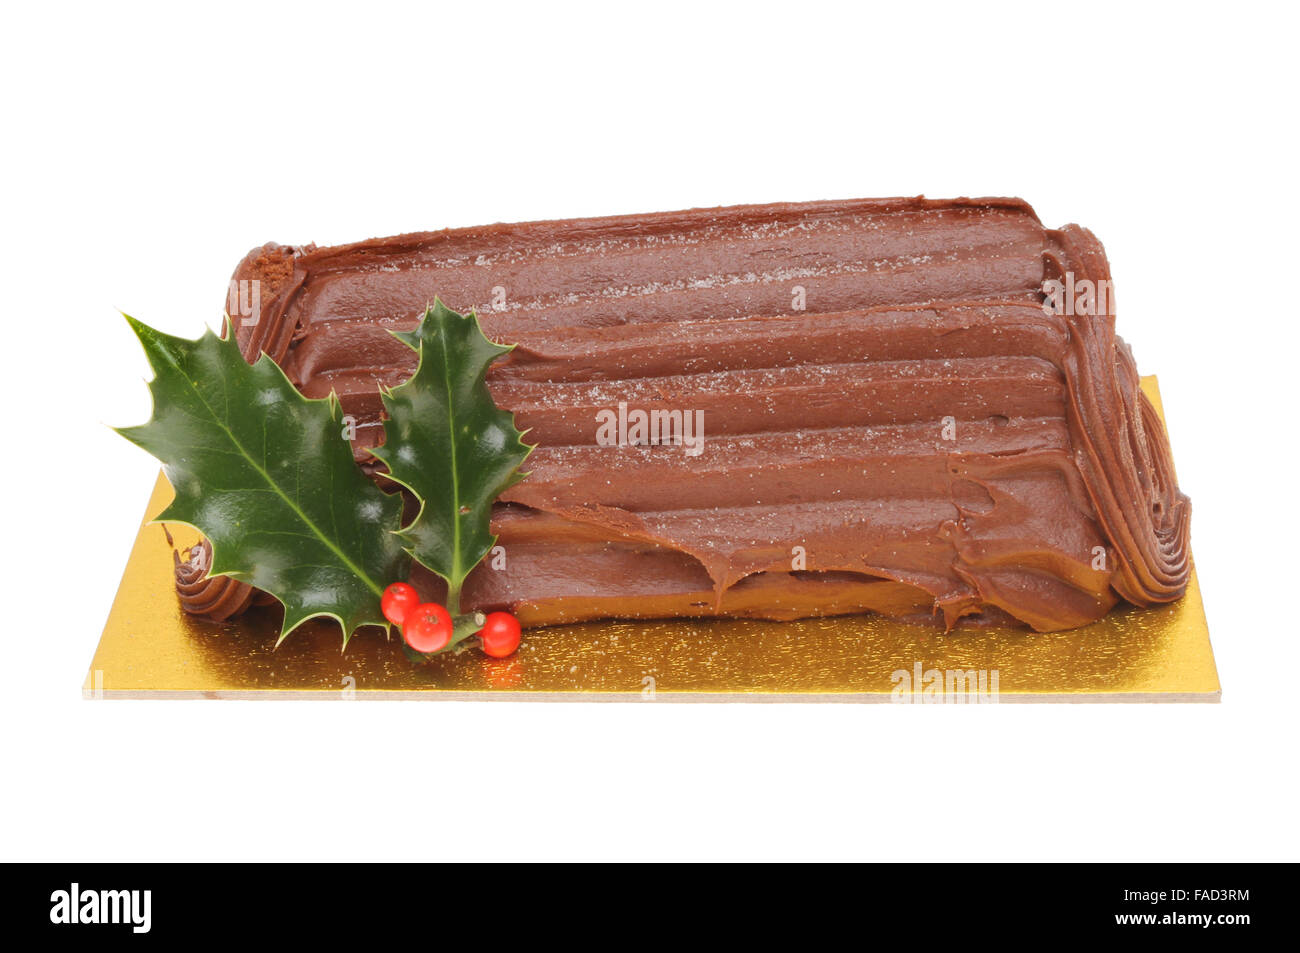 Chocolate yule log decorated with a sprig of holly isolated against white Stock Photo